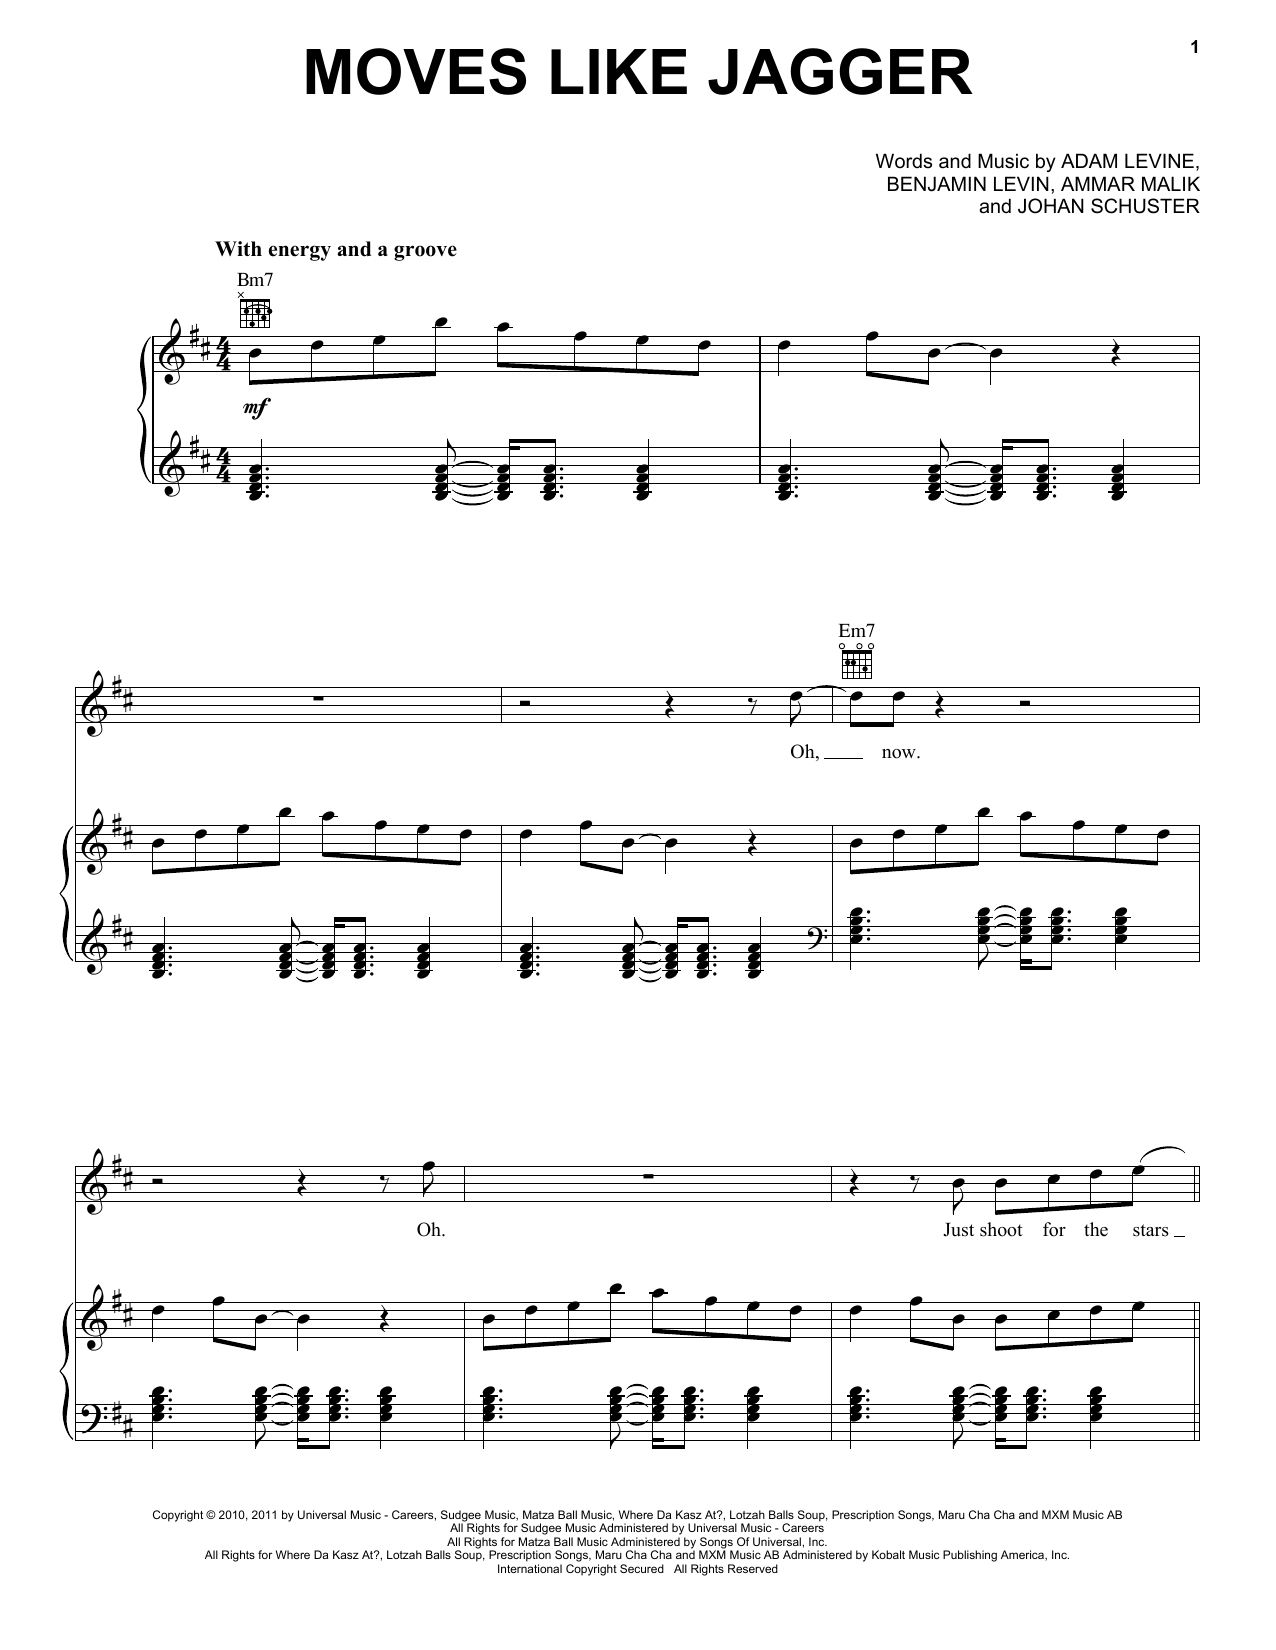 Maroon 5 featuring Christina Aguilera Moves Like Jagger sheet music preview music notes and score for Piano, Vocal & Guitar (Right-Hand Melody) including 6 page(s)